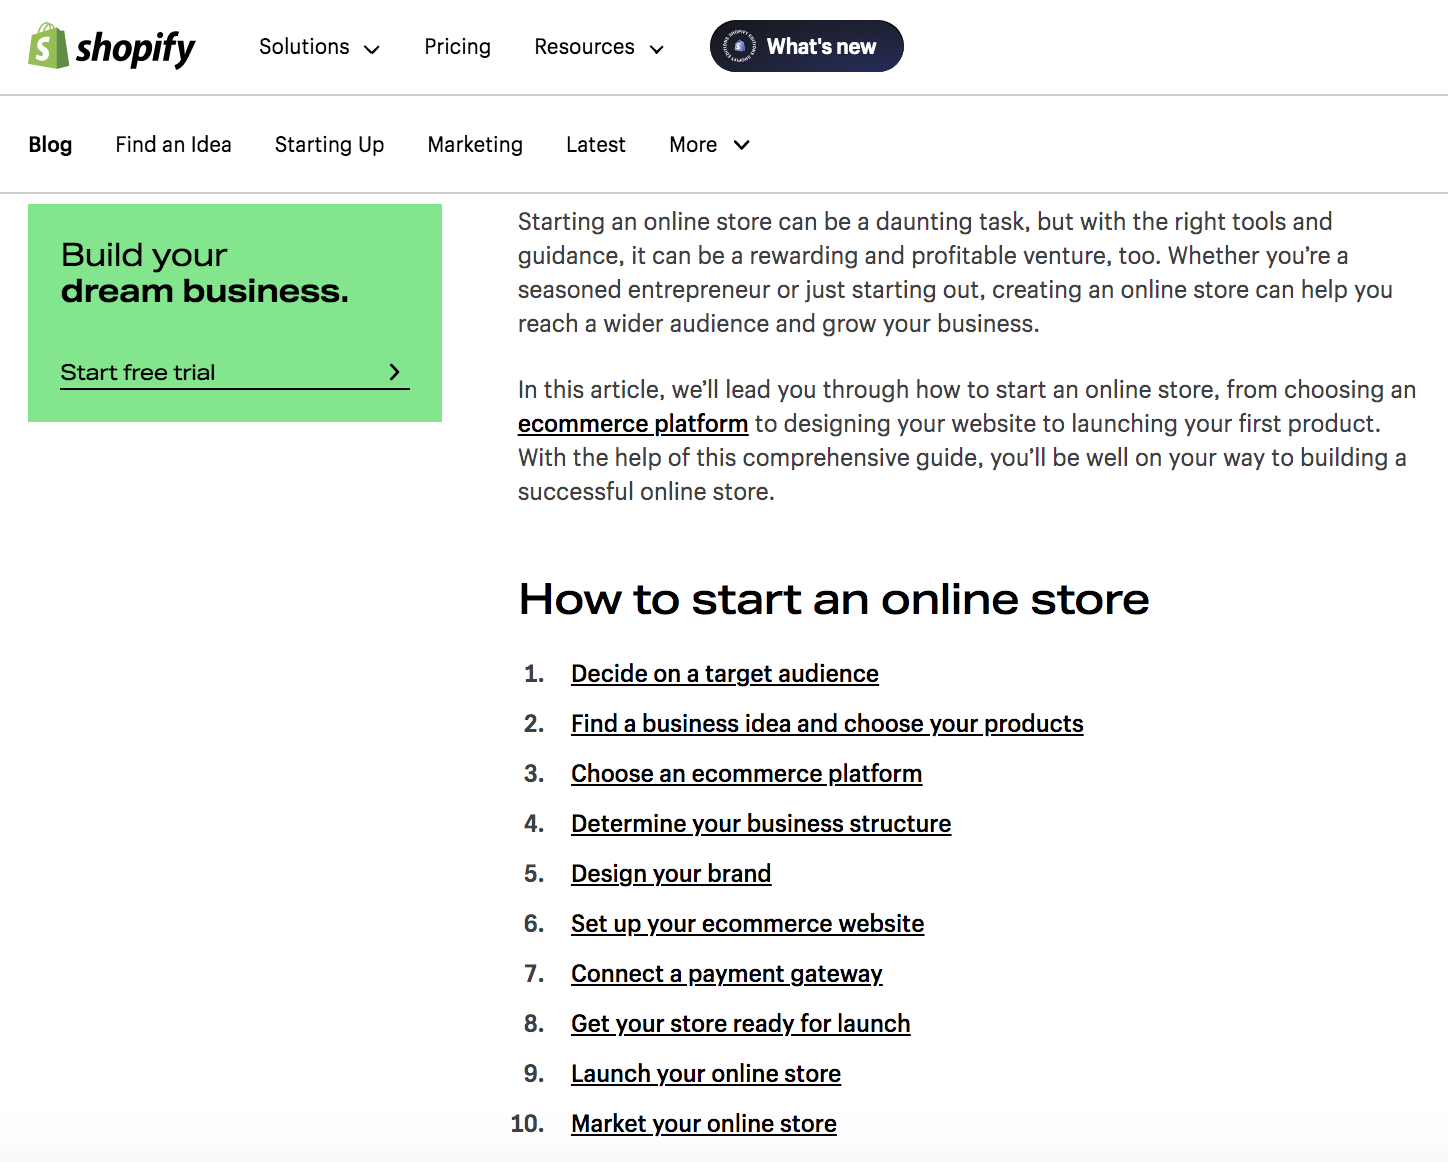 Shopify's blog post on how to start an online store